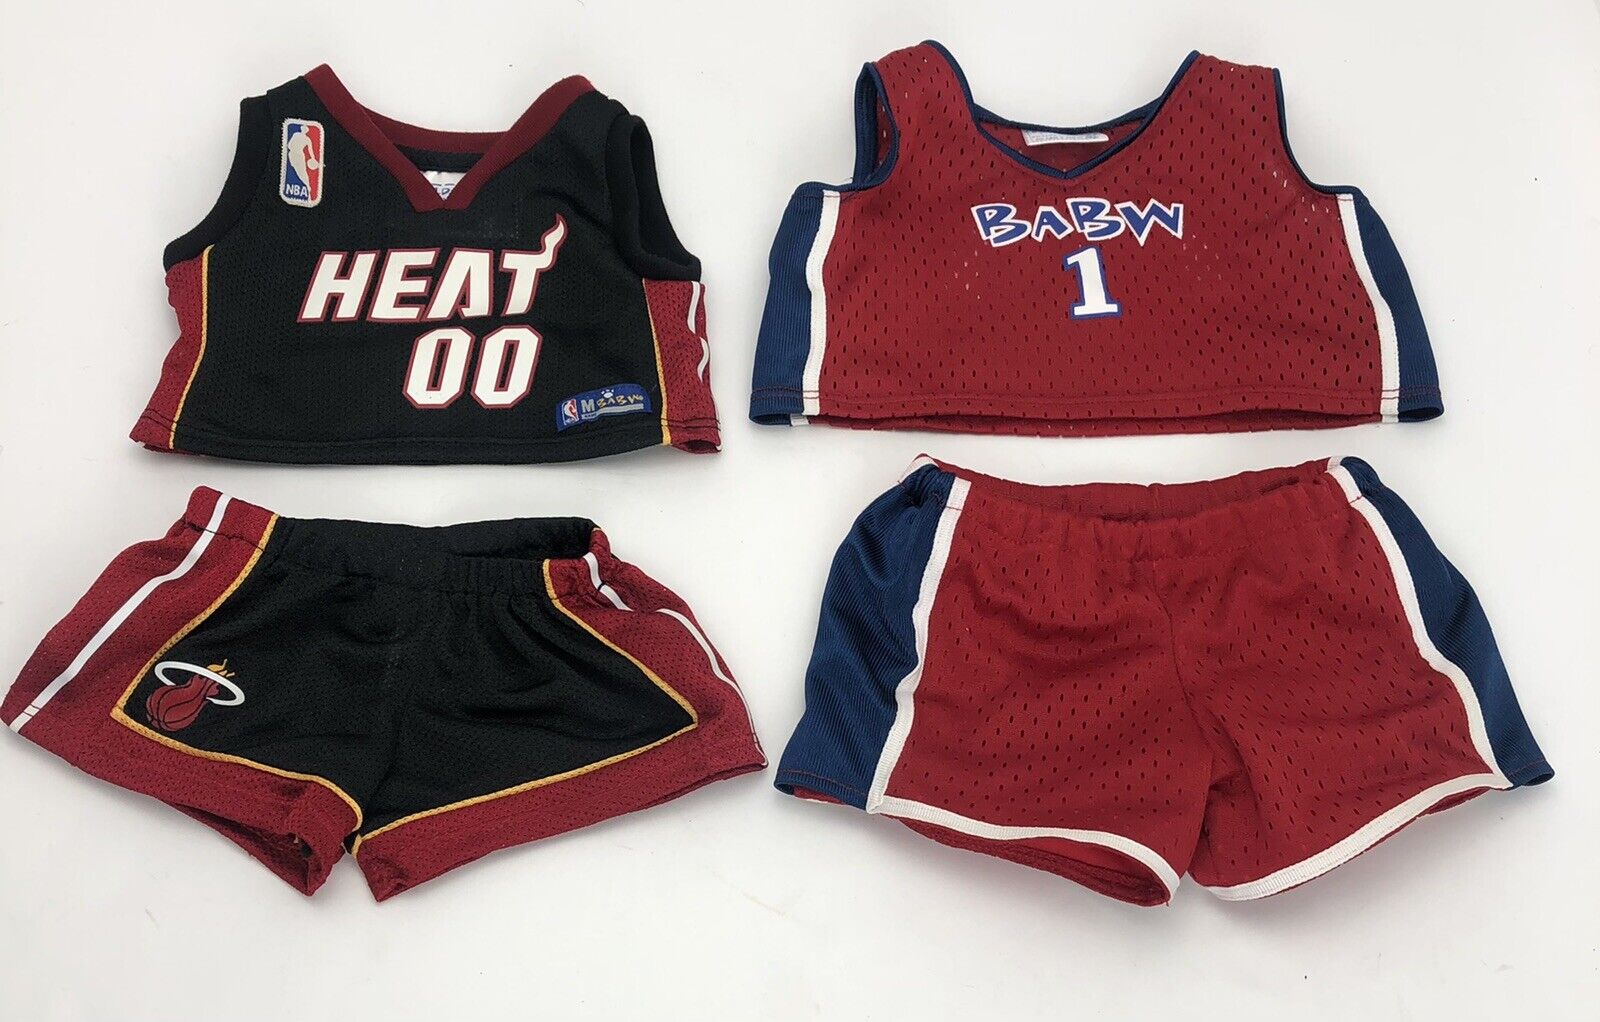 Build A Bear Workshop Clothes NBA Basketball Jersey And Shorts Outfit 4pcs